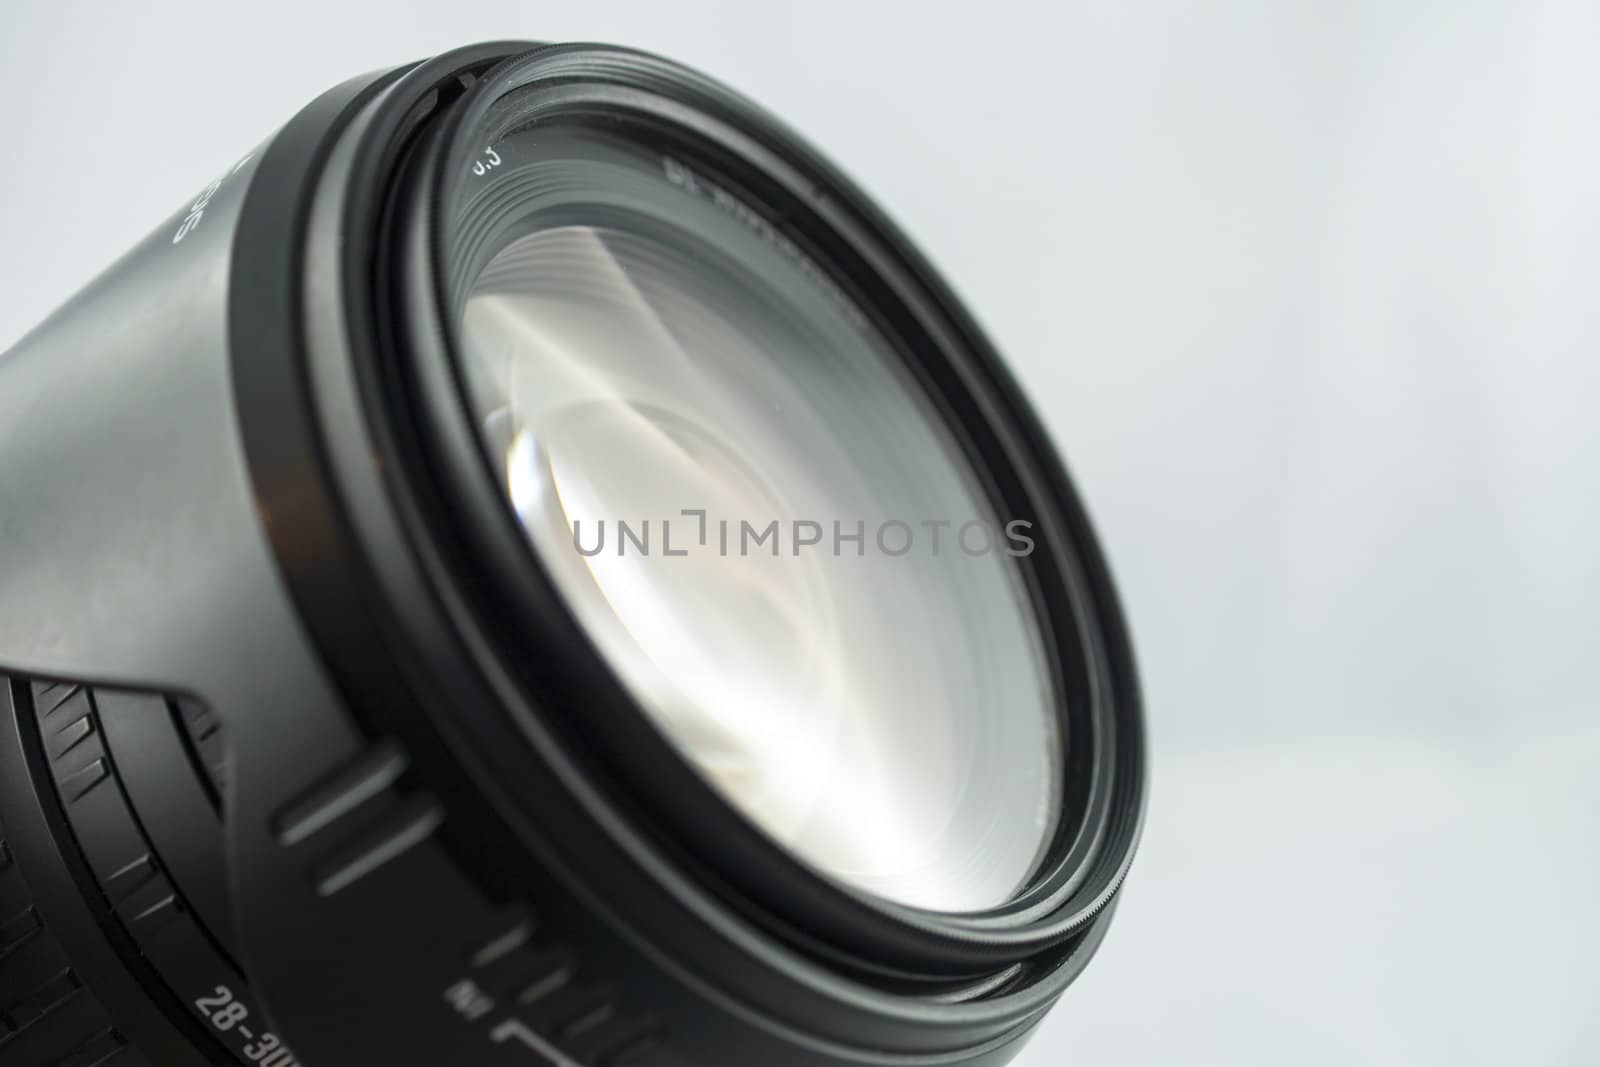 Lens with reflective gray and white background